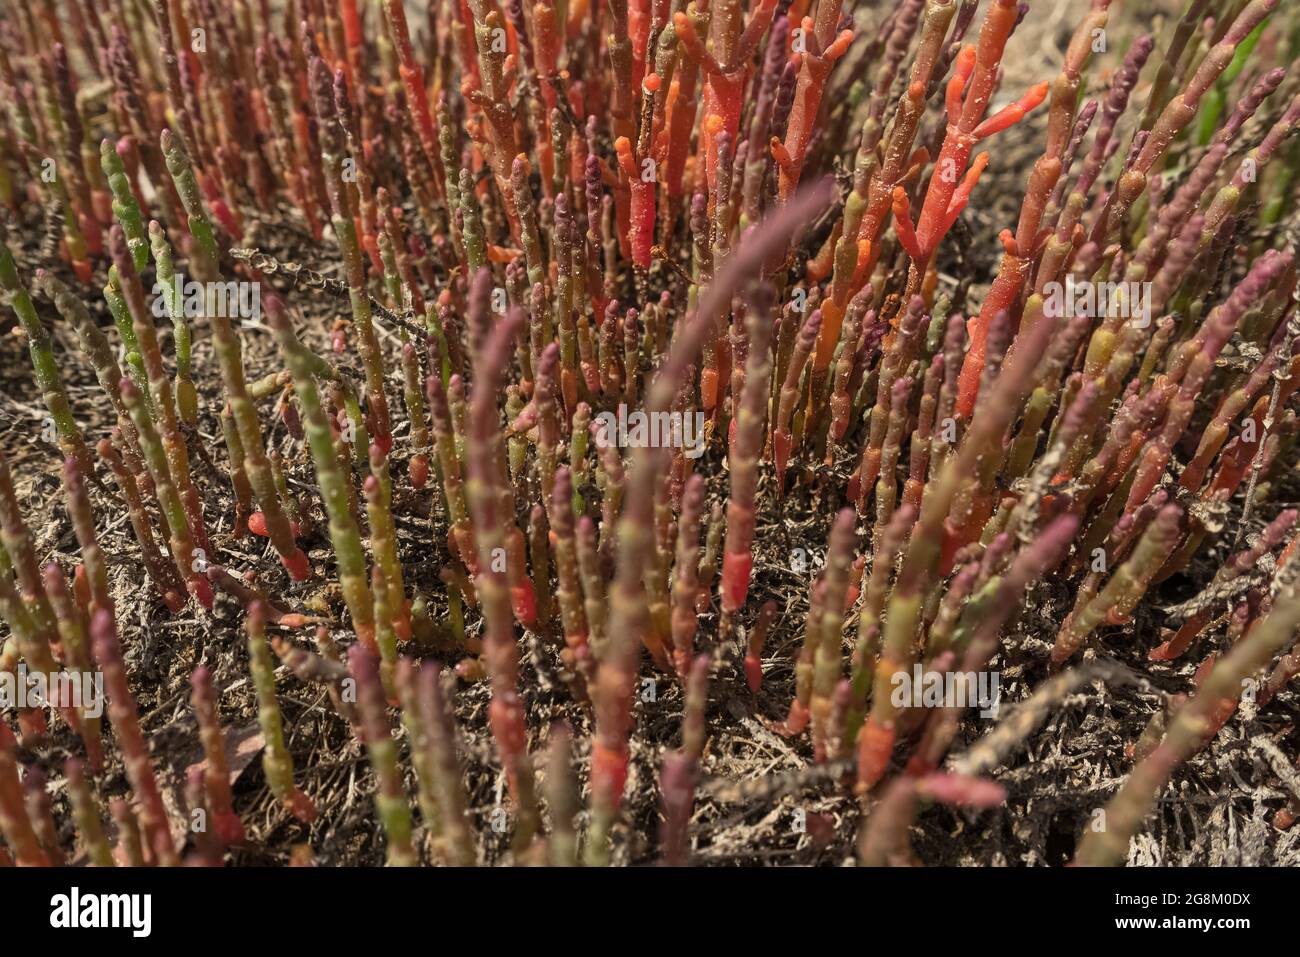 growing red glasswort close up view edible plant that grows in salty soil Stock Photo